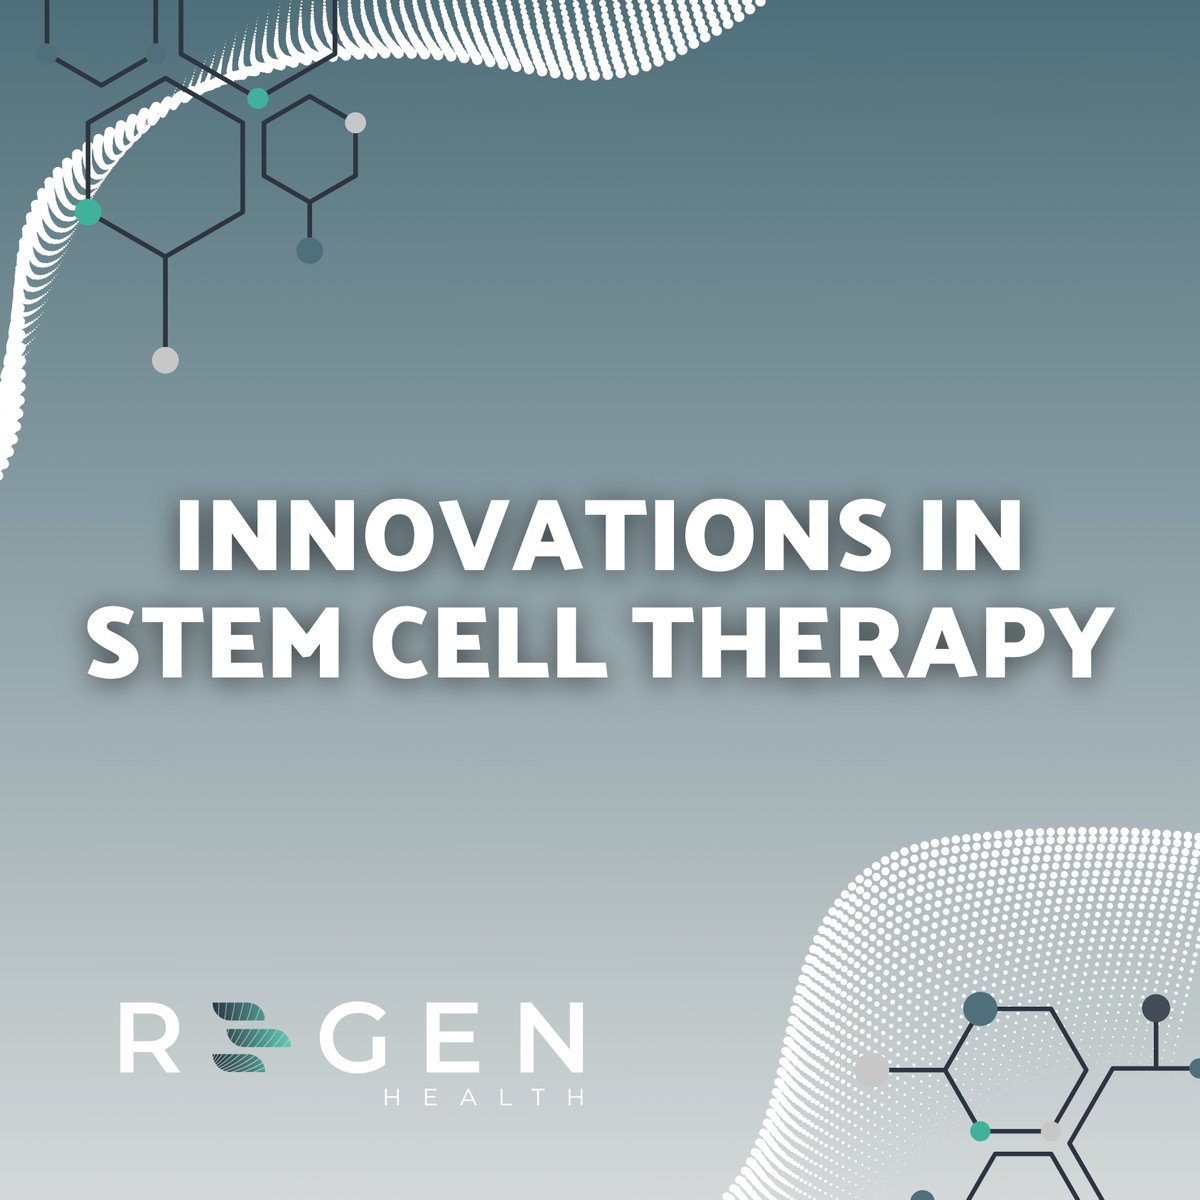 Stem cell therapy is changing the game in medicine 🧬! From healing injuries to fighting chronic diseases, the possibilities are endless. What's the most exciting advancement you've seen? 

#stemcelltherapy #innovation